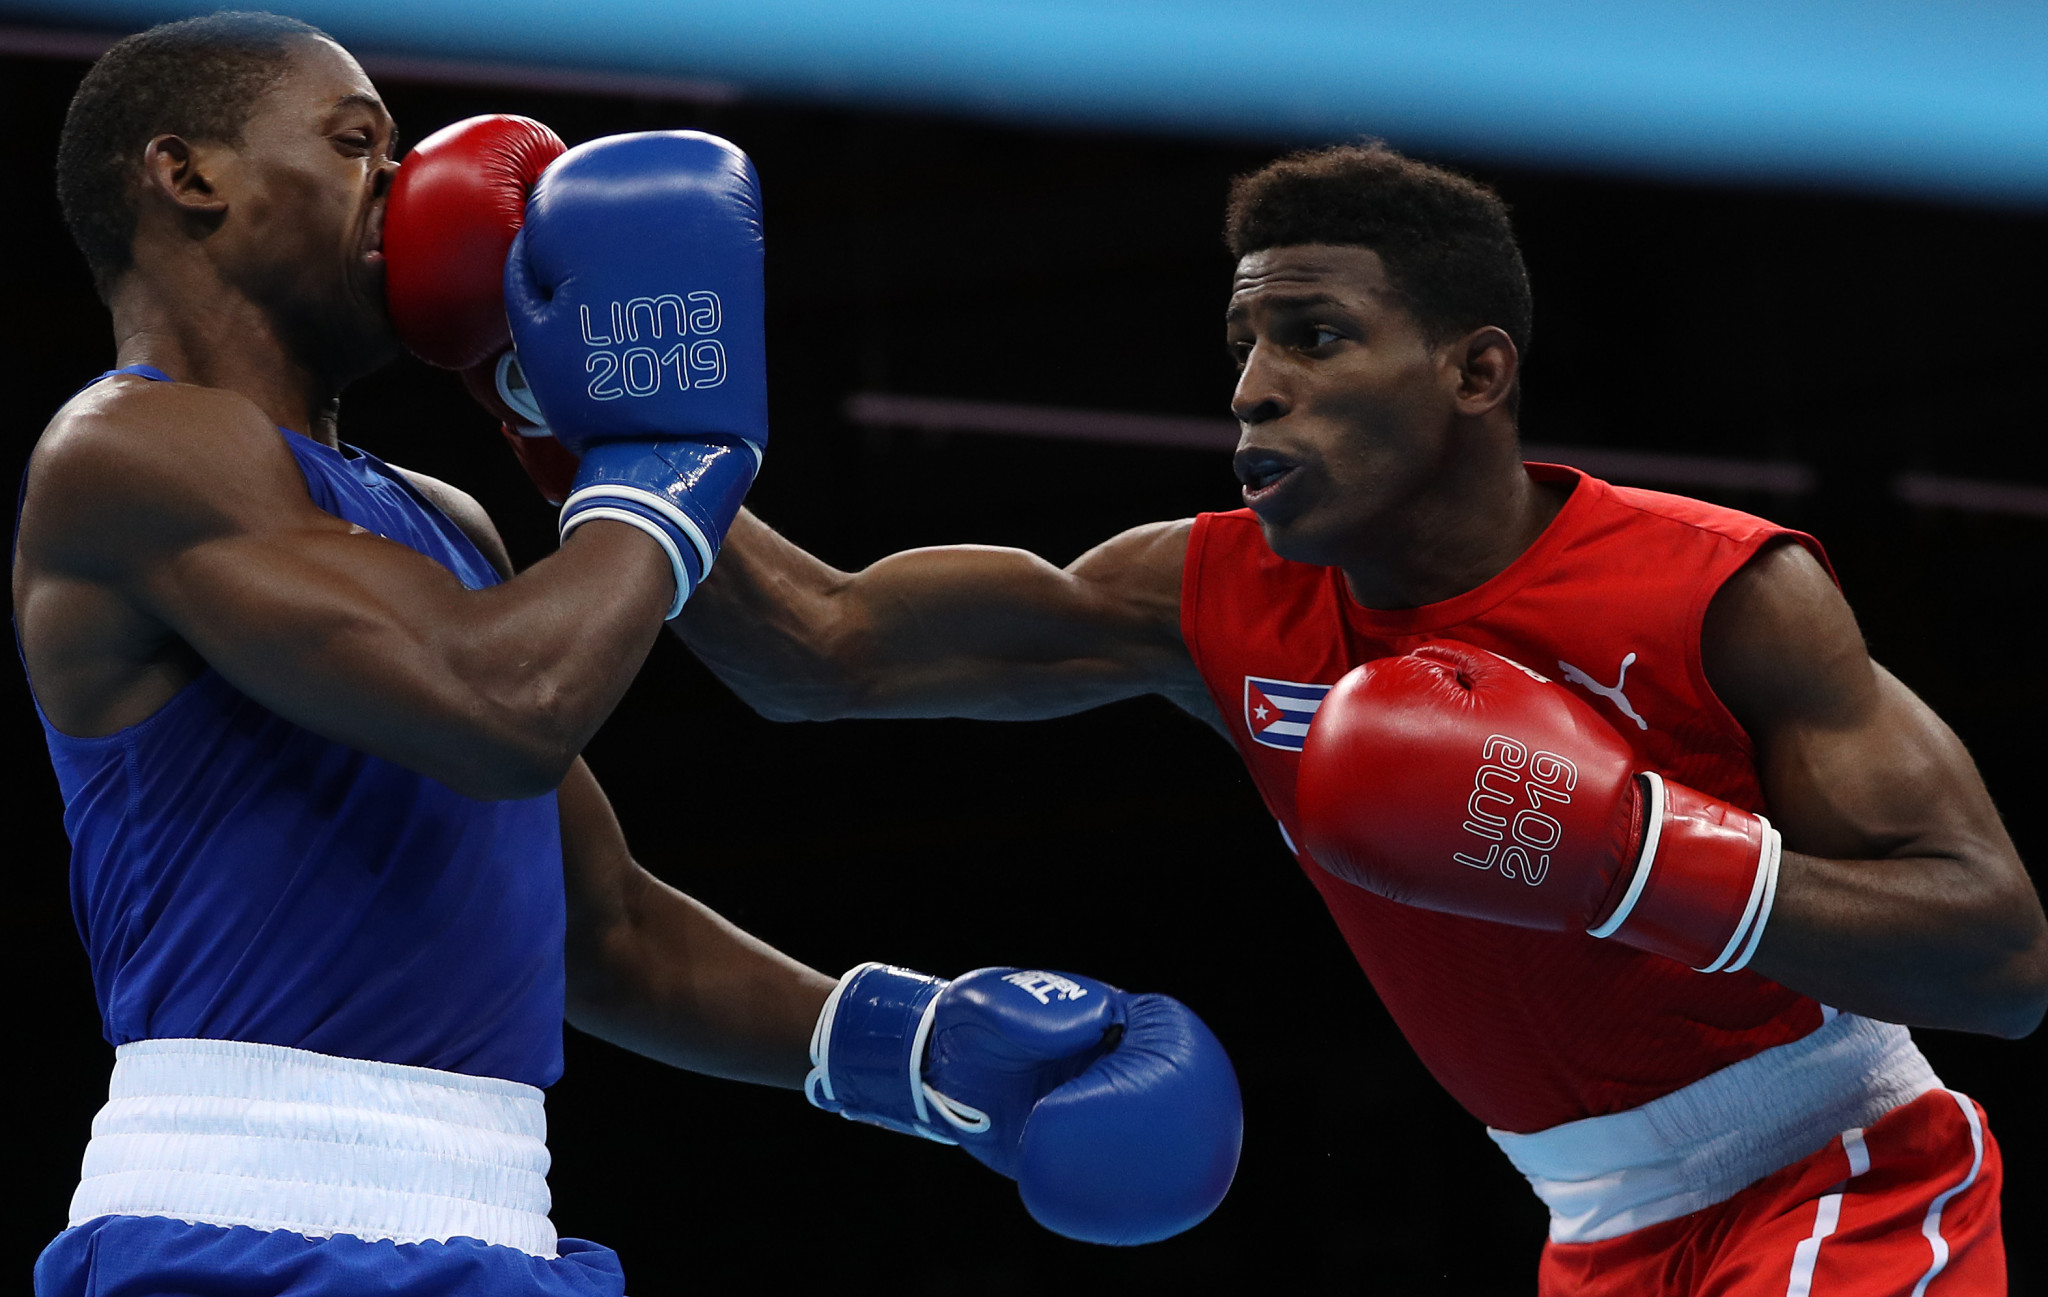 Cuban boxers attend training camp in preparation for Olympic qualifier